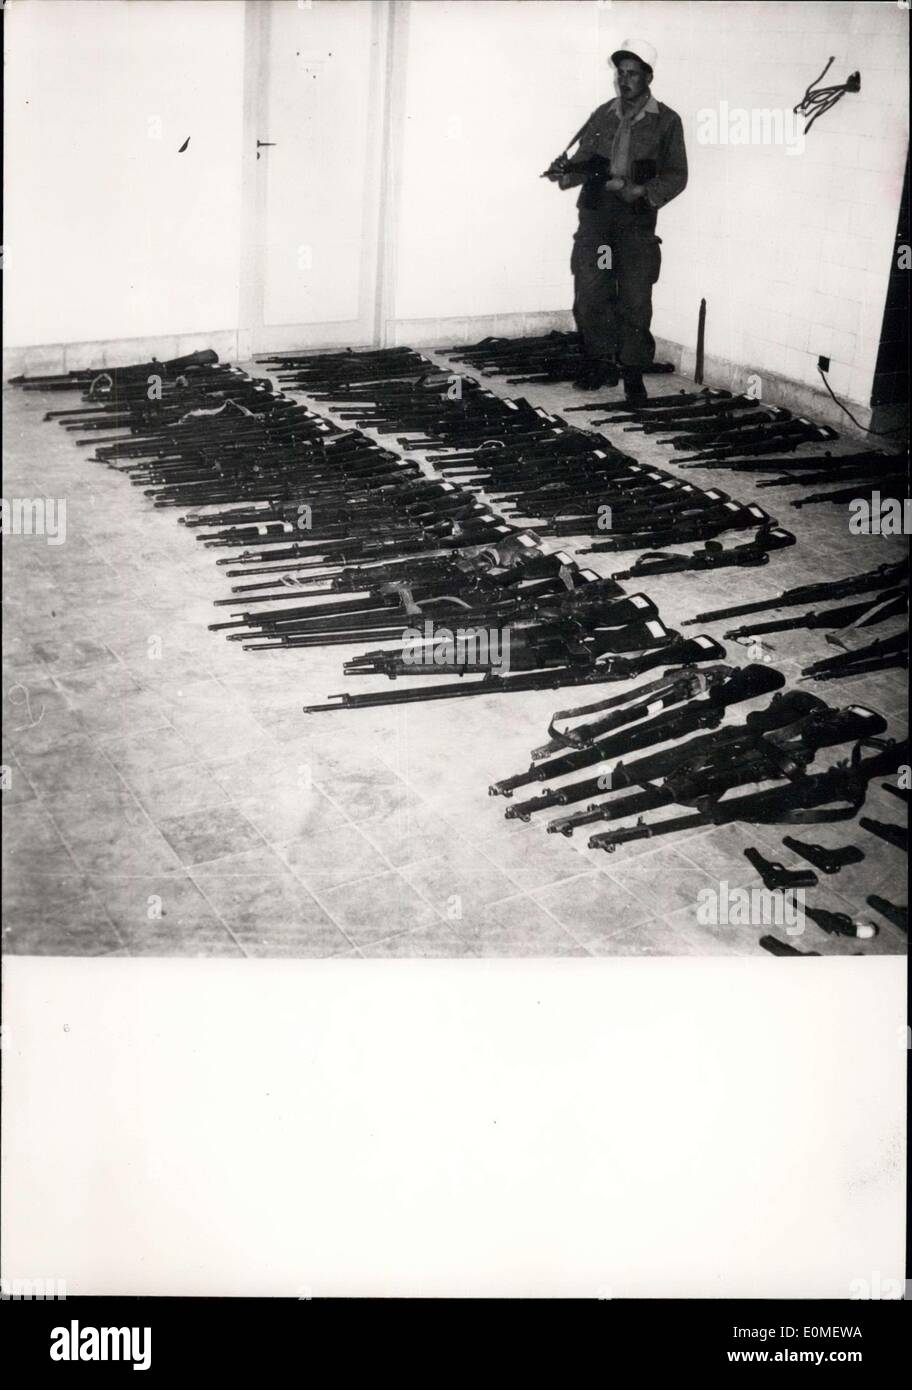 Dec. 08, 1954 - Algerian Rebels Give Up War Weapons Some of the rifles given up by Fellaghas (The Algerian Rebels) as they stopped fighting in the Gafsa area. Stock Photo